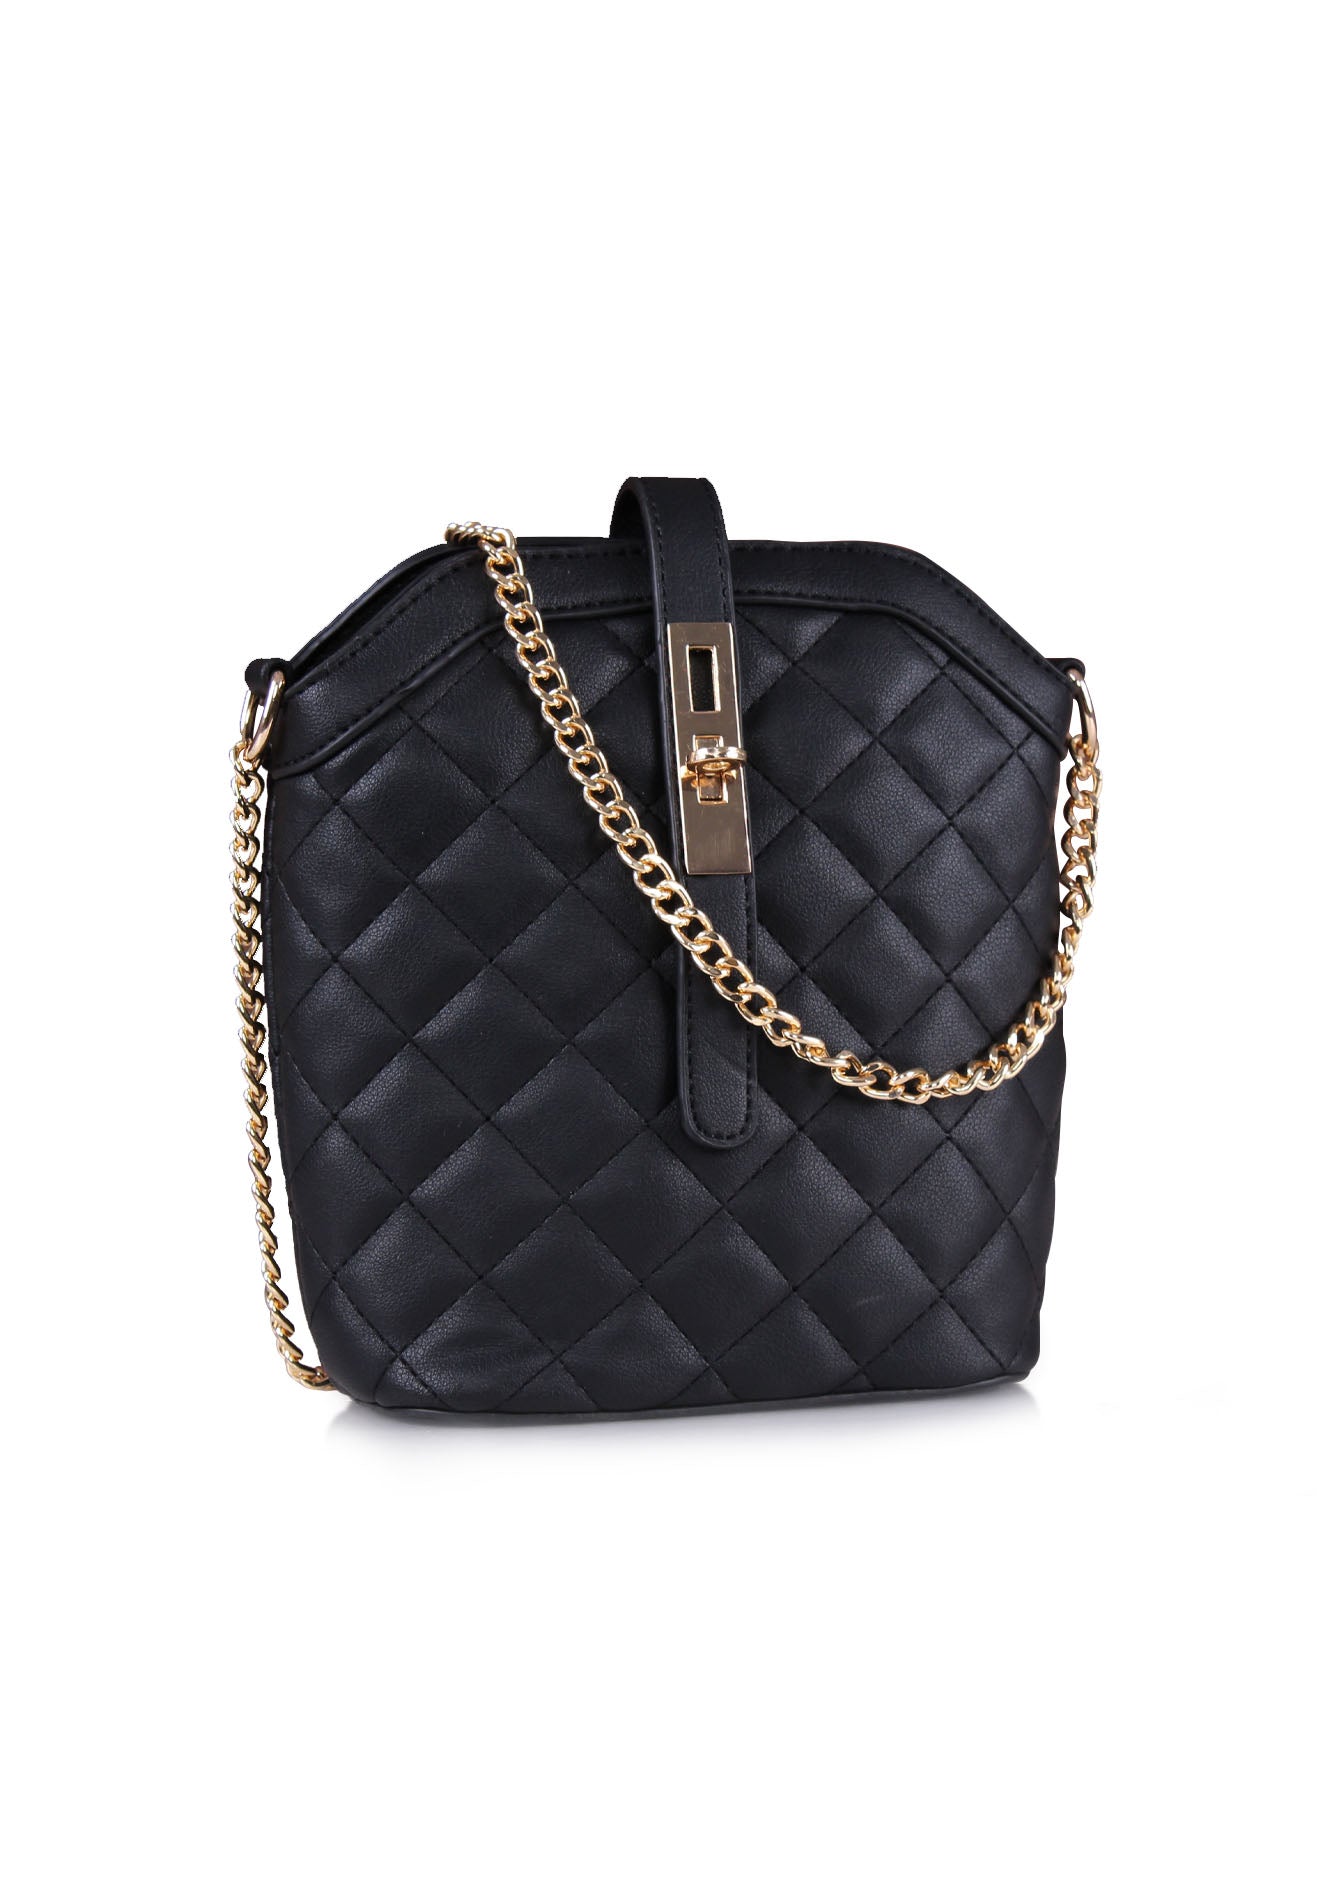 Show Me Your Shine Black/Silver Quilted Bag - BAG1682BK